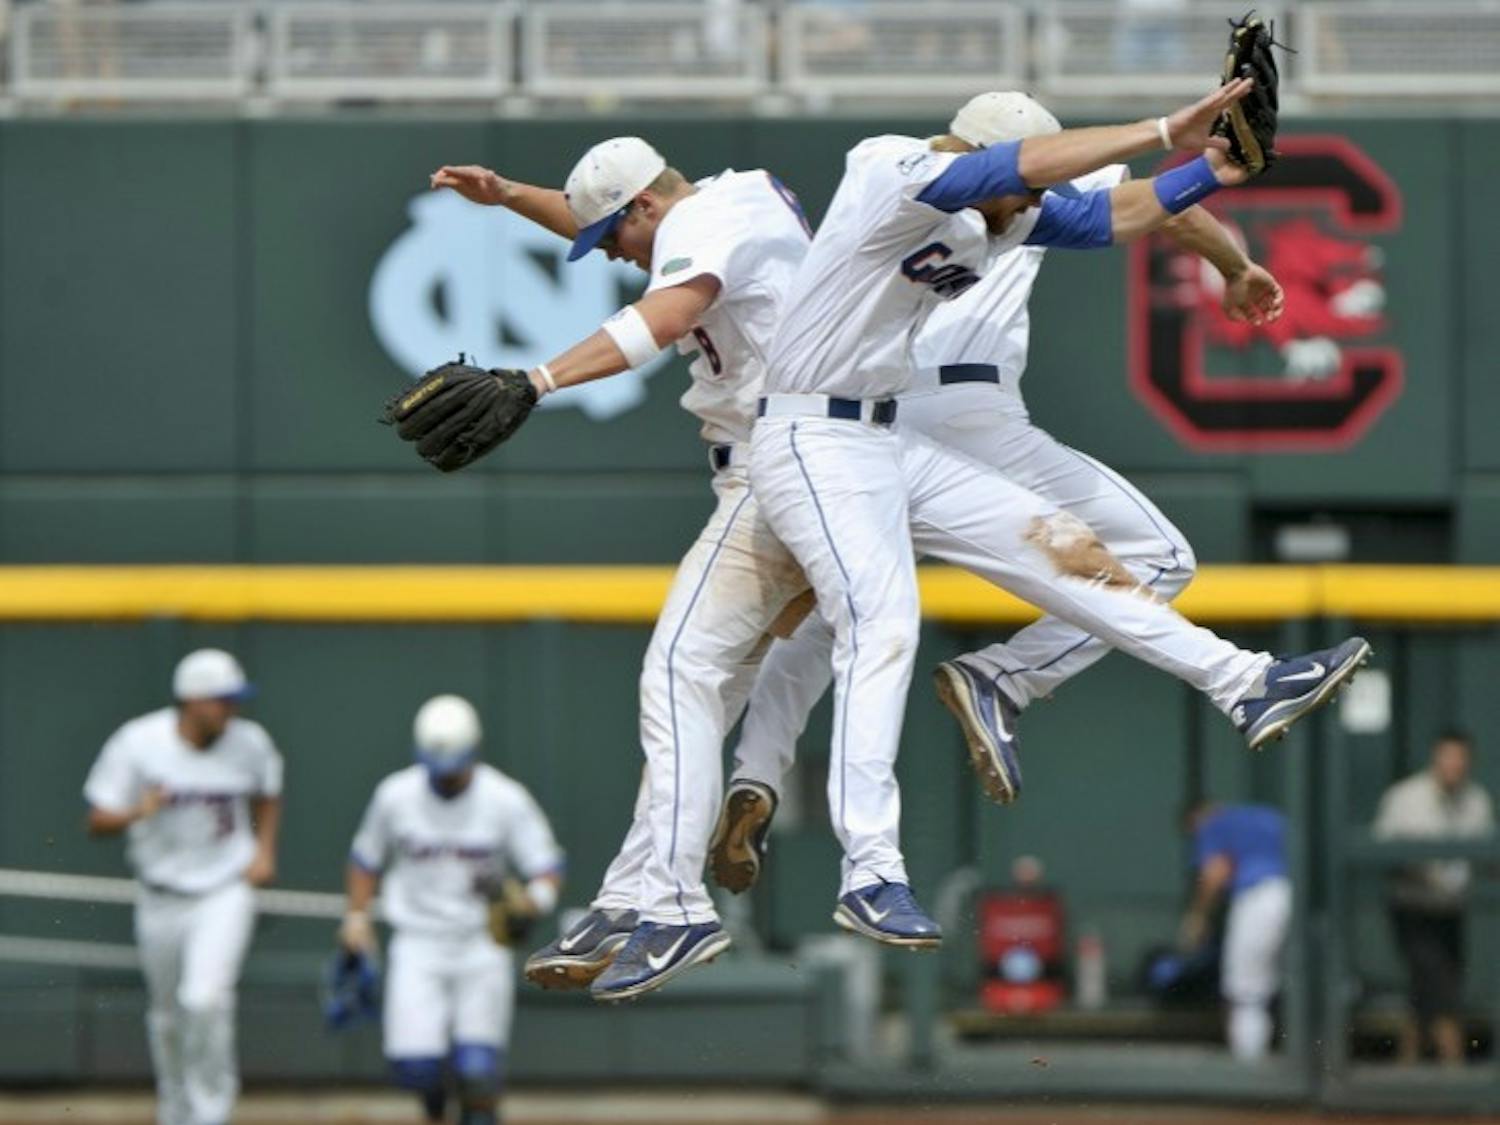 Florida beat Vanderbilt 6-4 Friday to advance to its second-ever College World Series championship series. The Gators will play either Virginia or South Carolina starting Monday.&nbsp;